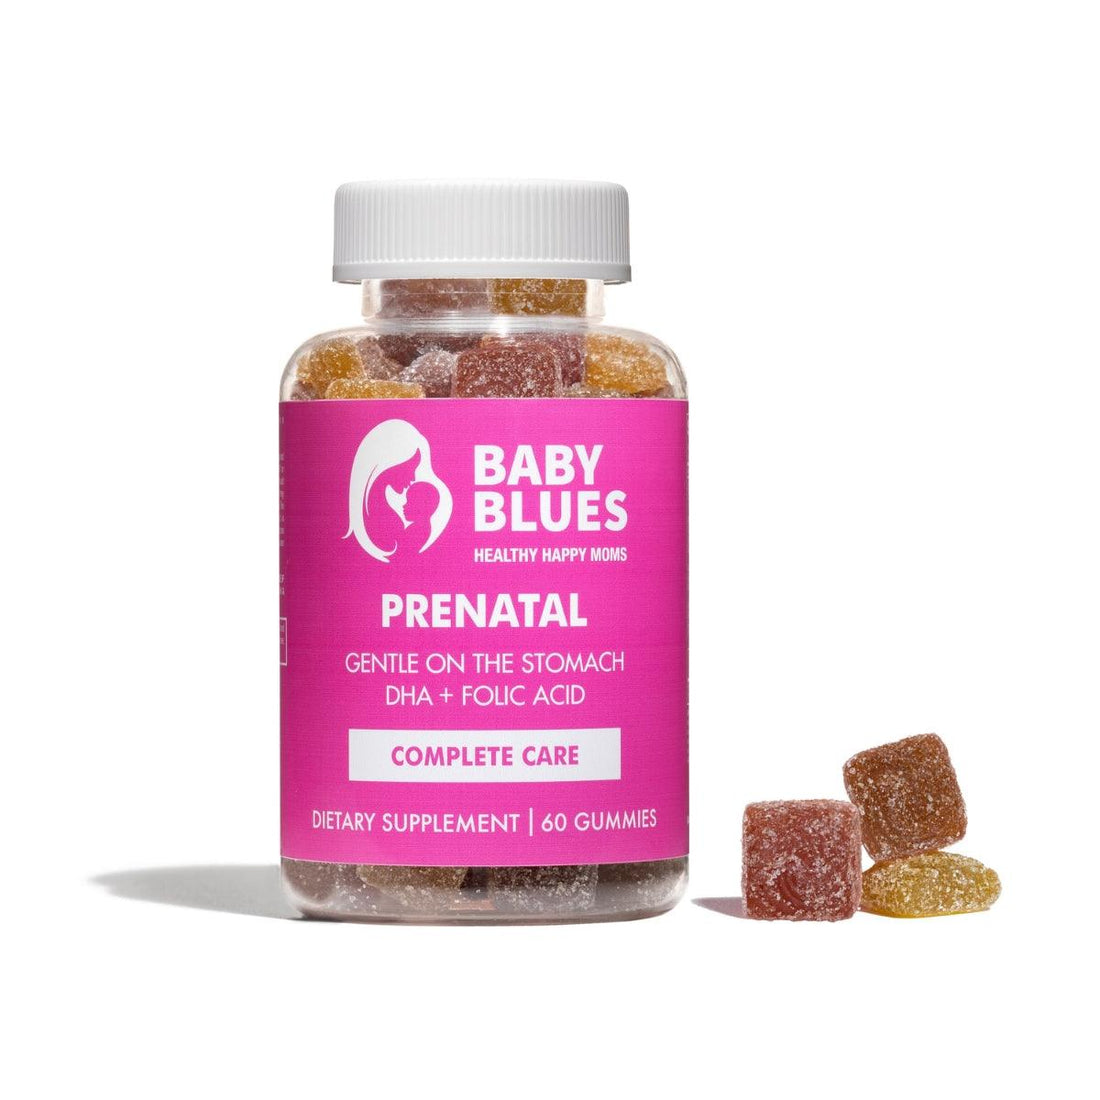 5 Best Postpartum Supplements Every Mom Should Know – Baby Blues